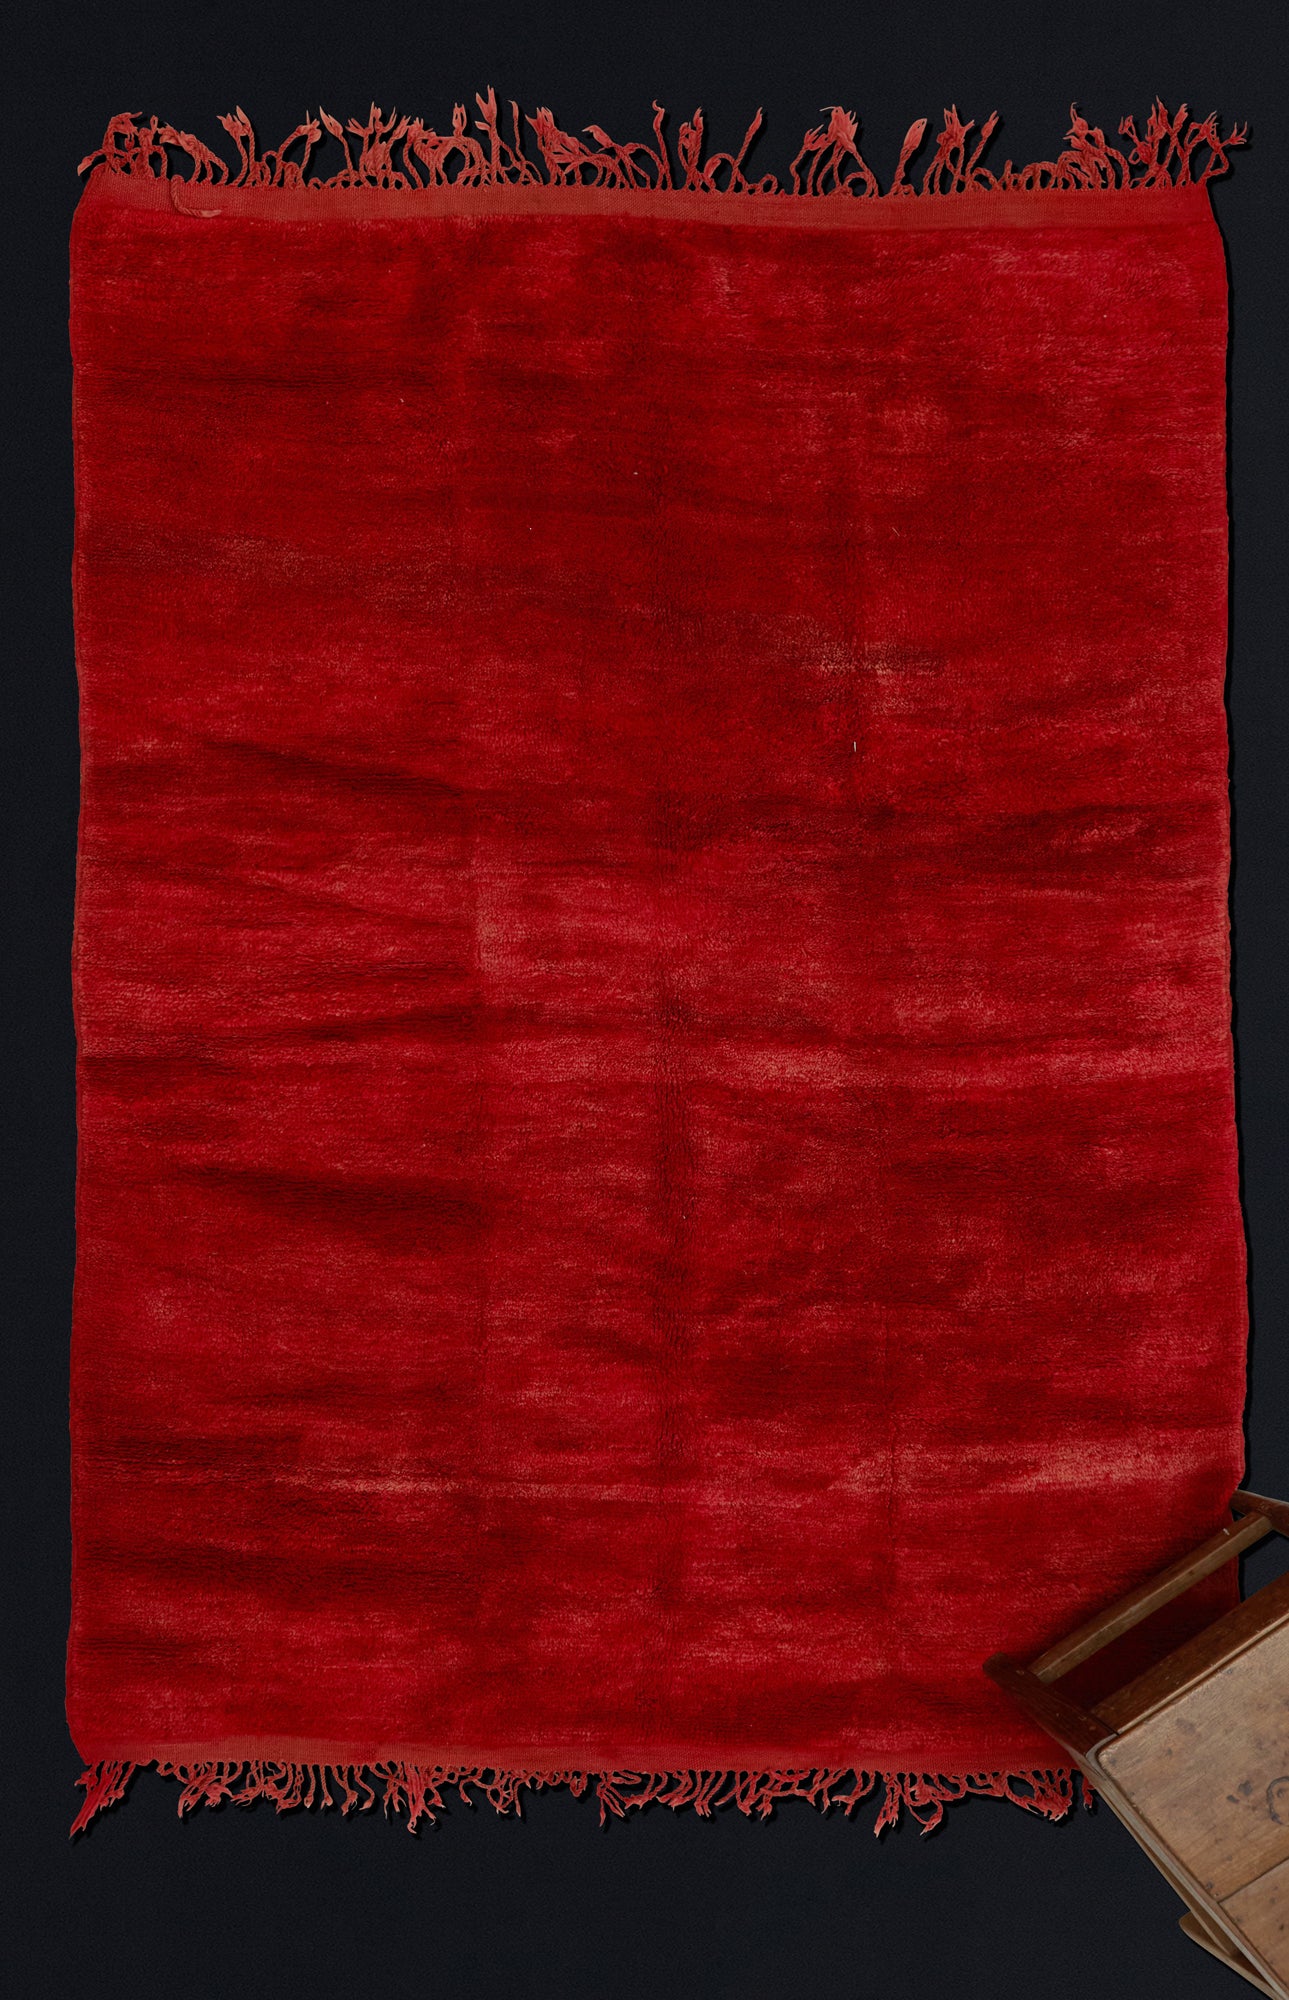 Medium Sized All Red Chichaoua Carpet with Fringe on Both End .............................. (5' 8'' x 7' 10'')